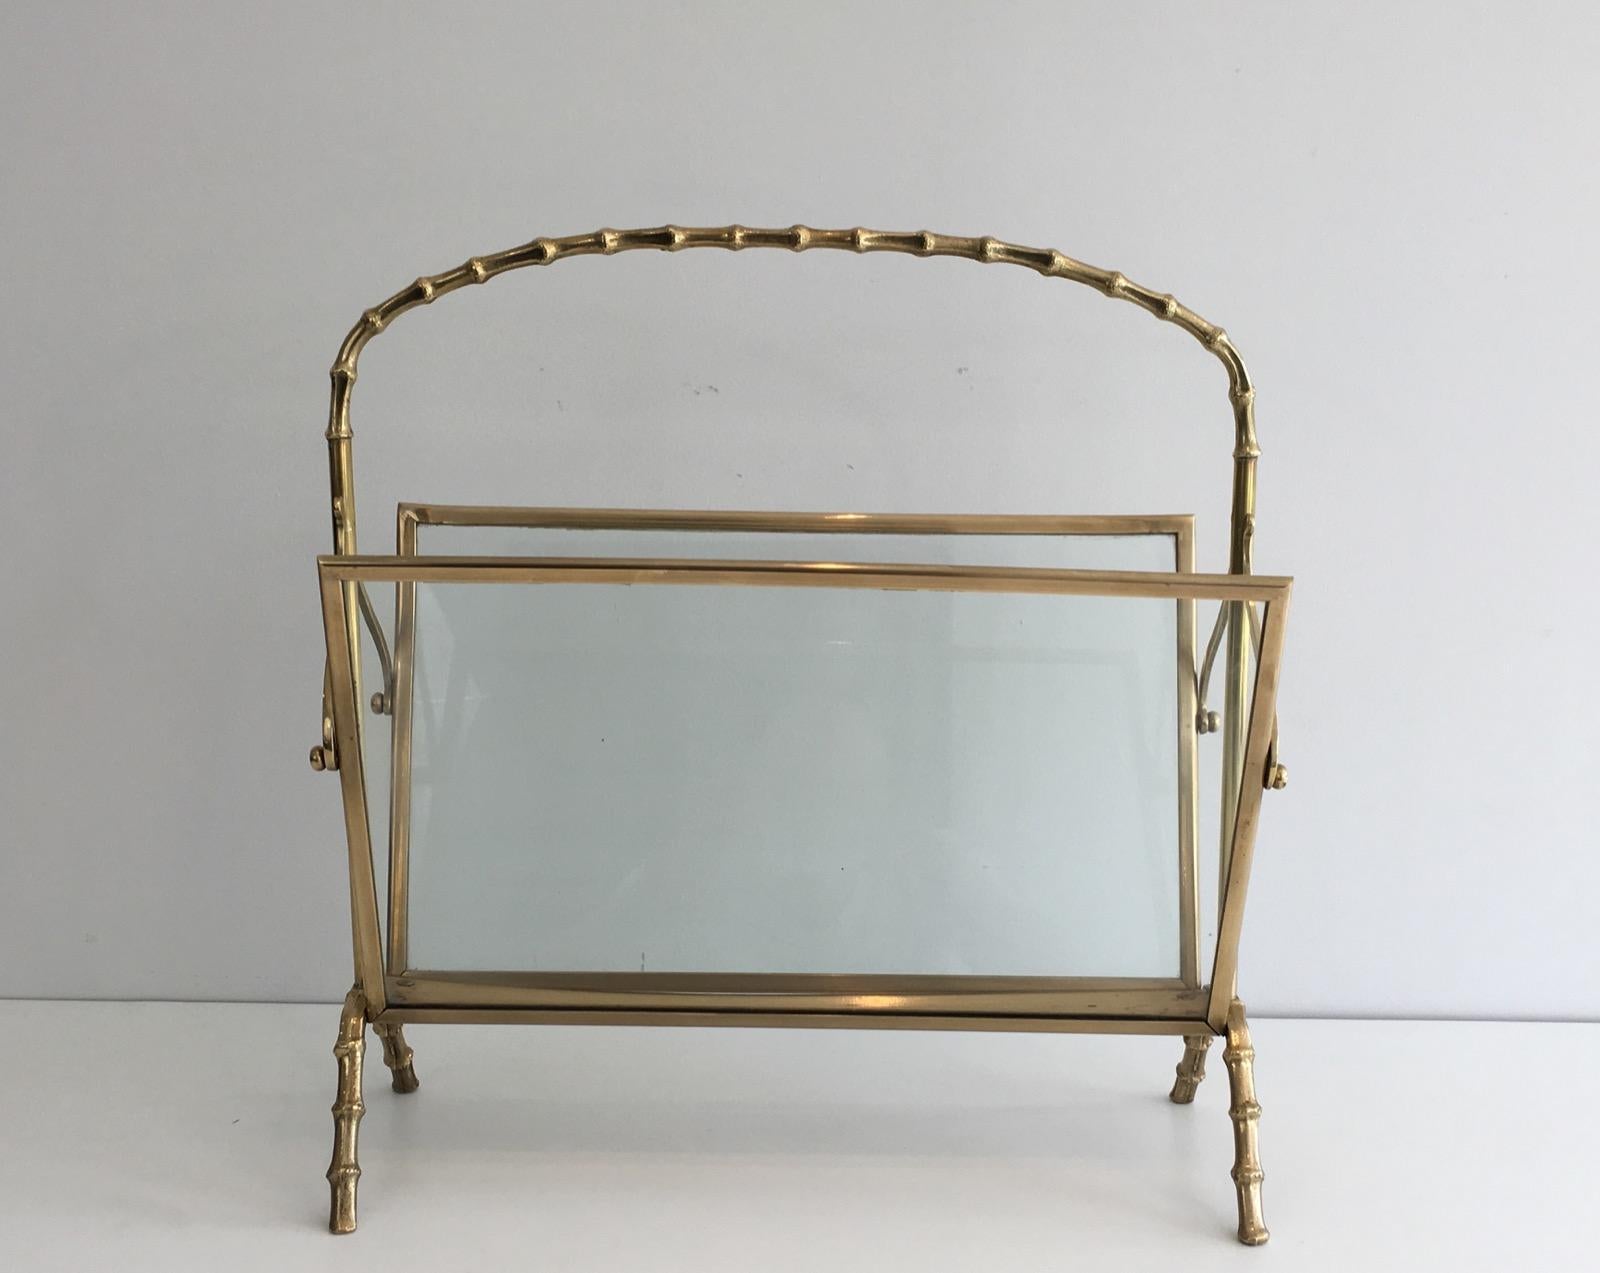 This very nice neoclassical magazine rack is made of bronze in the faux-bamboo style with glass panels on each side. It is a French work by famous French Maison Bagués, circa 1940.